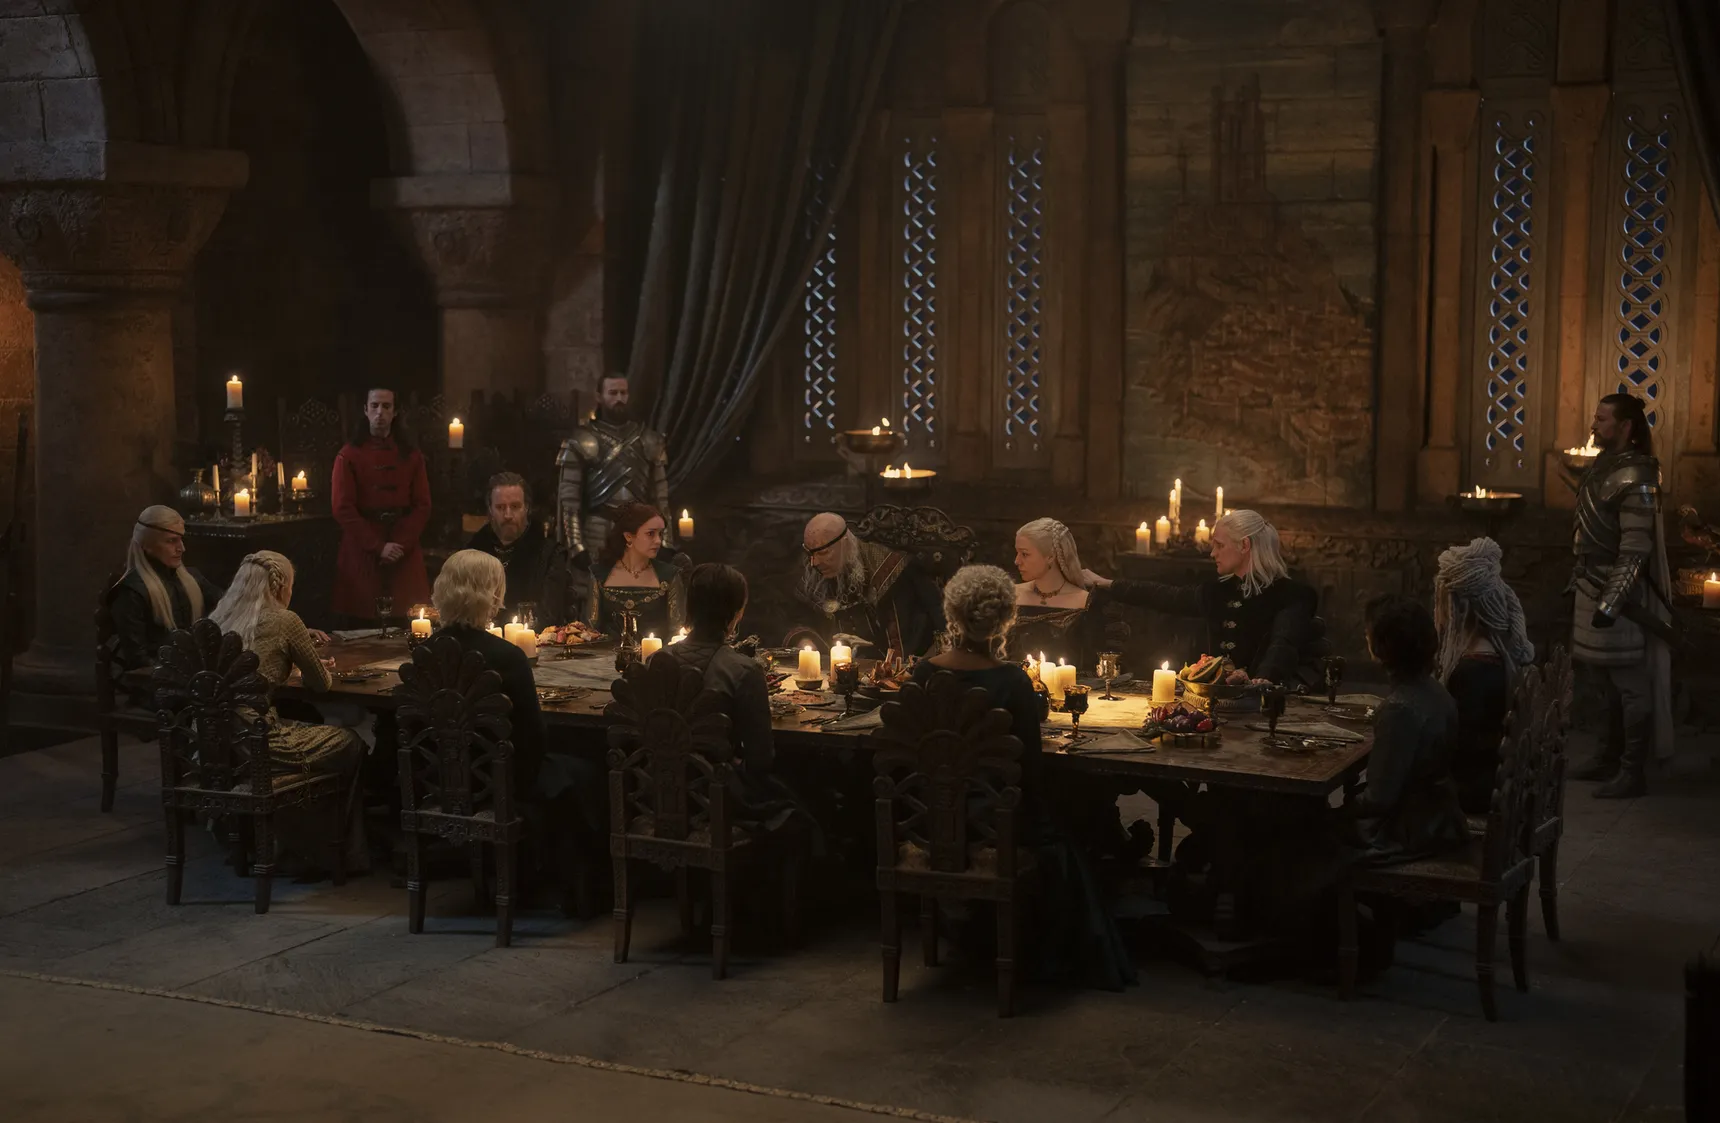 Aemond Targaryen is House of the Dragon’s most tragic character and its best villain